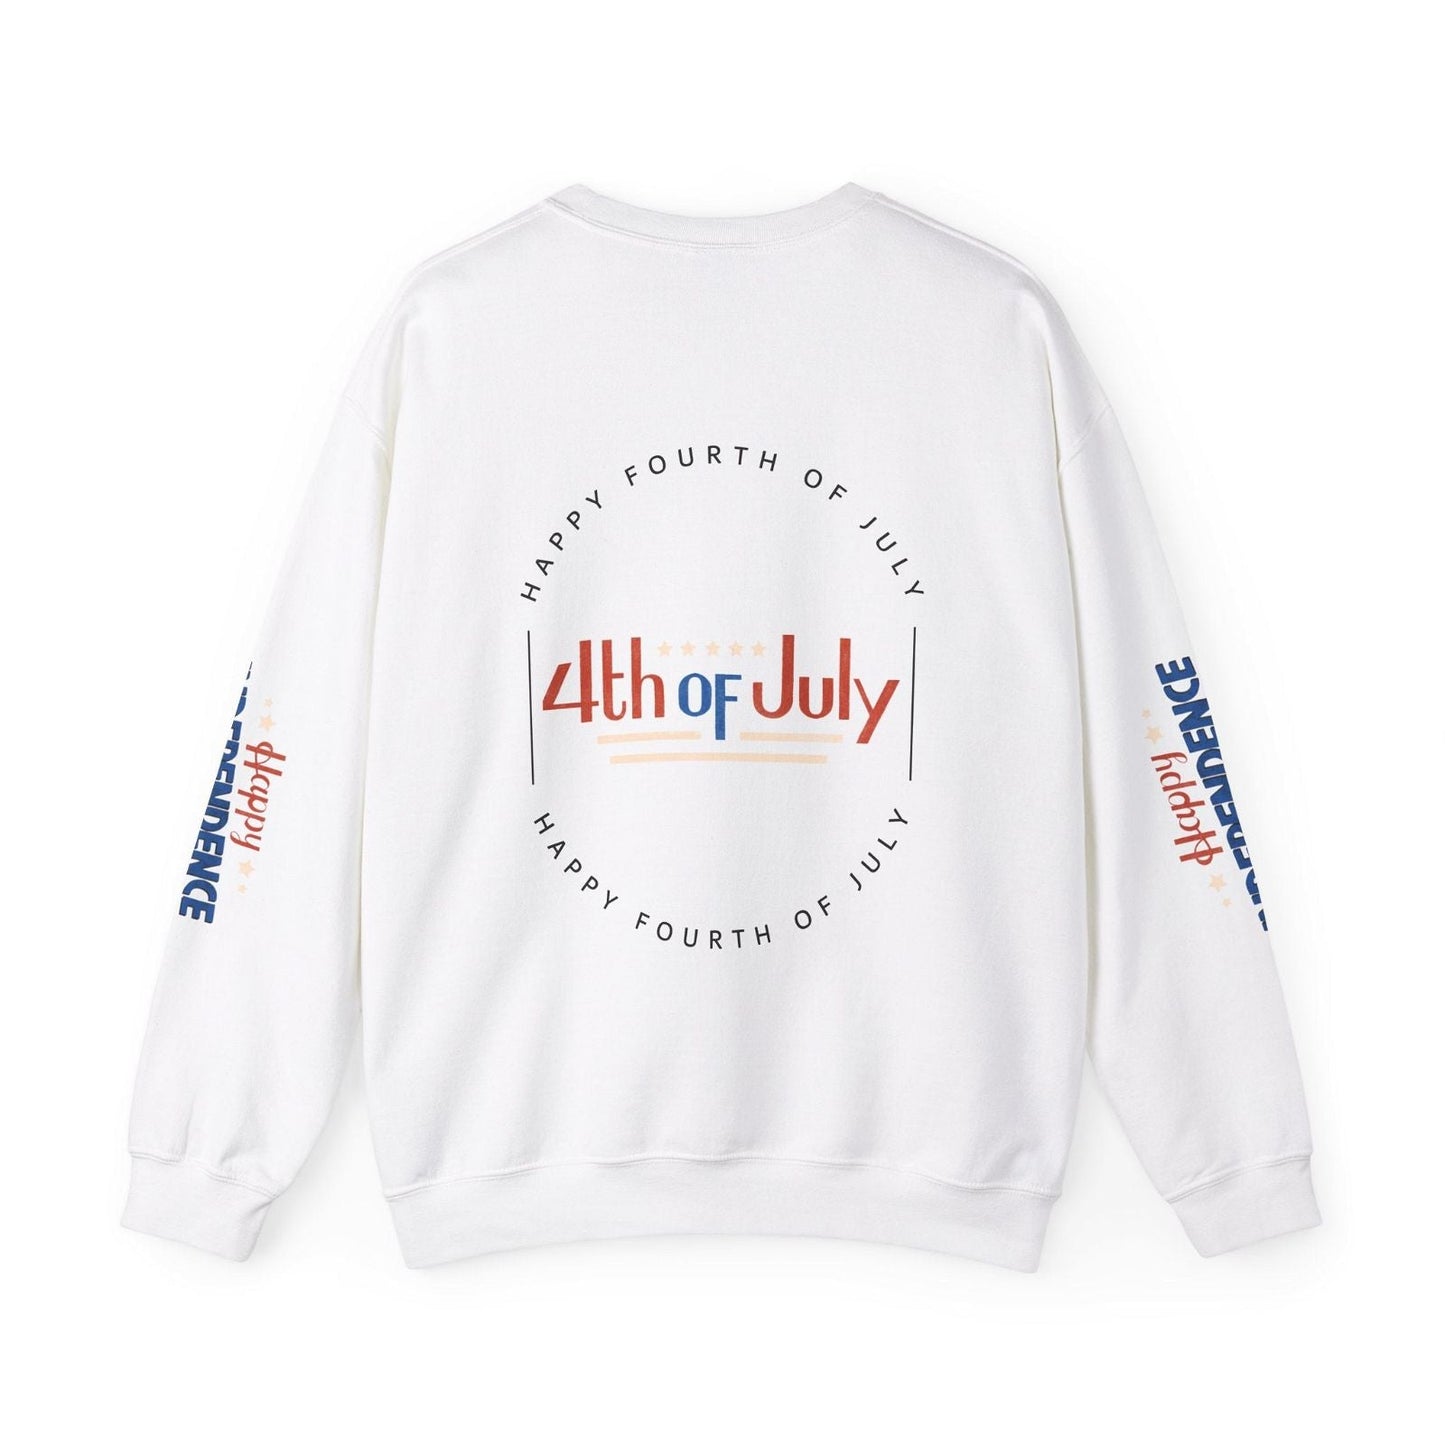 Happy independence day - Happy 4th of july - Sweatshirt Blend™️ - Alex's Store - S - 